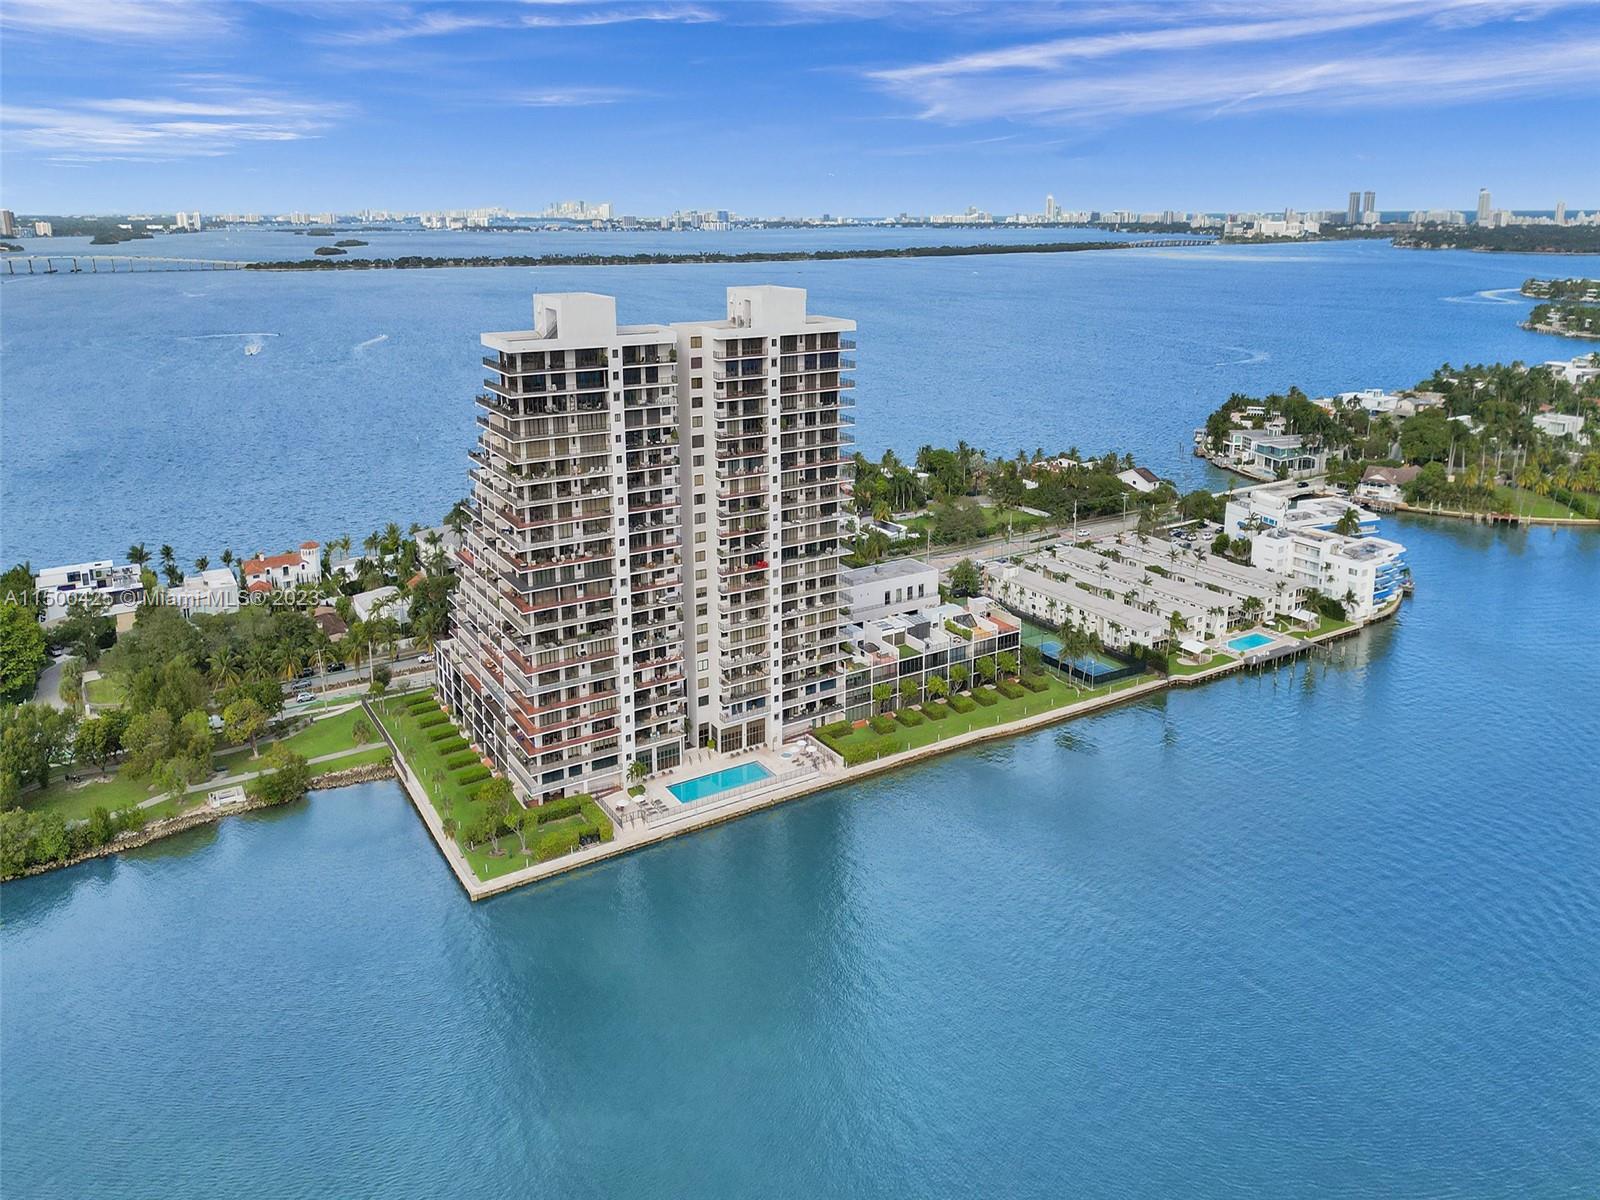 Indulge in Upscale Living: Breathtaking water & city views, north and south exposures in this meticulously renovated unit. Spacious, open, wooden floors, contemporary aesthetic. Expansive balconies on either side, a perfect blend of indoor and outdoor living. A laundry facility & pantry closet. The kitchen's Italian cabinetry, adds a touch of sophistication. Venetian Causeway, this residence is nestled between the vibrant east corridor of Downtown Miami & the allure of Miami Beach. Near airports, Brickell, Midtown, and Wynwood. Unparalleled amenities gym, spa, tennis courts, heated pool, dog park, boardwalk, secured entrance with a concierge. Elevate your lifestyle, location that seamlessly combines luxury & convenience.
TENANT OCCUPIED THROUGH 5-14-2025 - SEE BROKERS REMARKS!